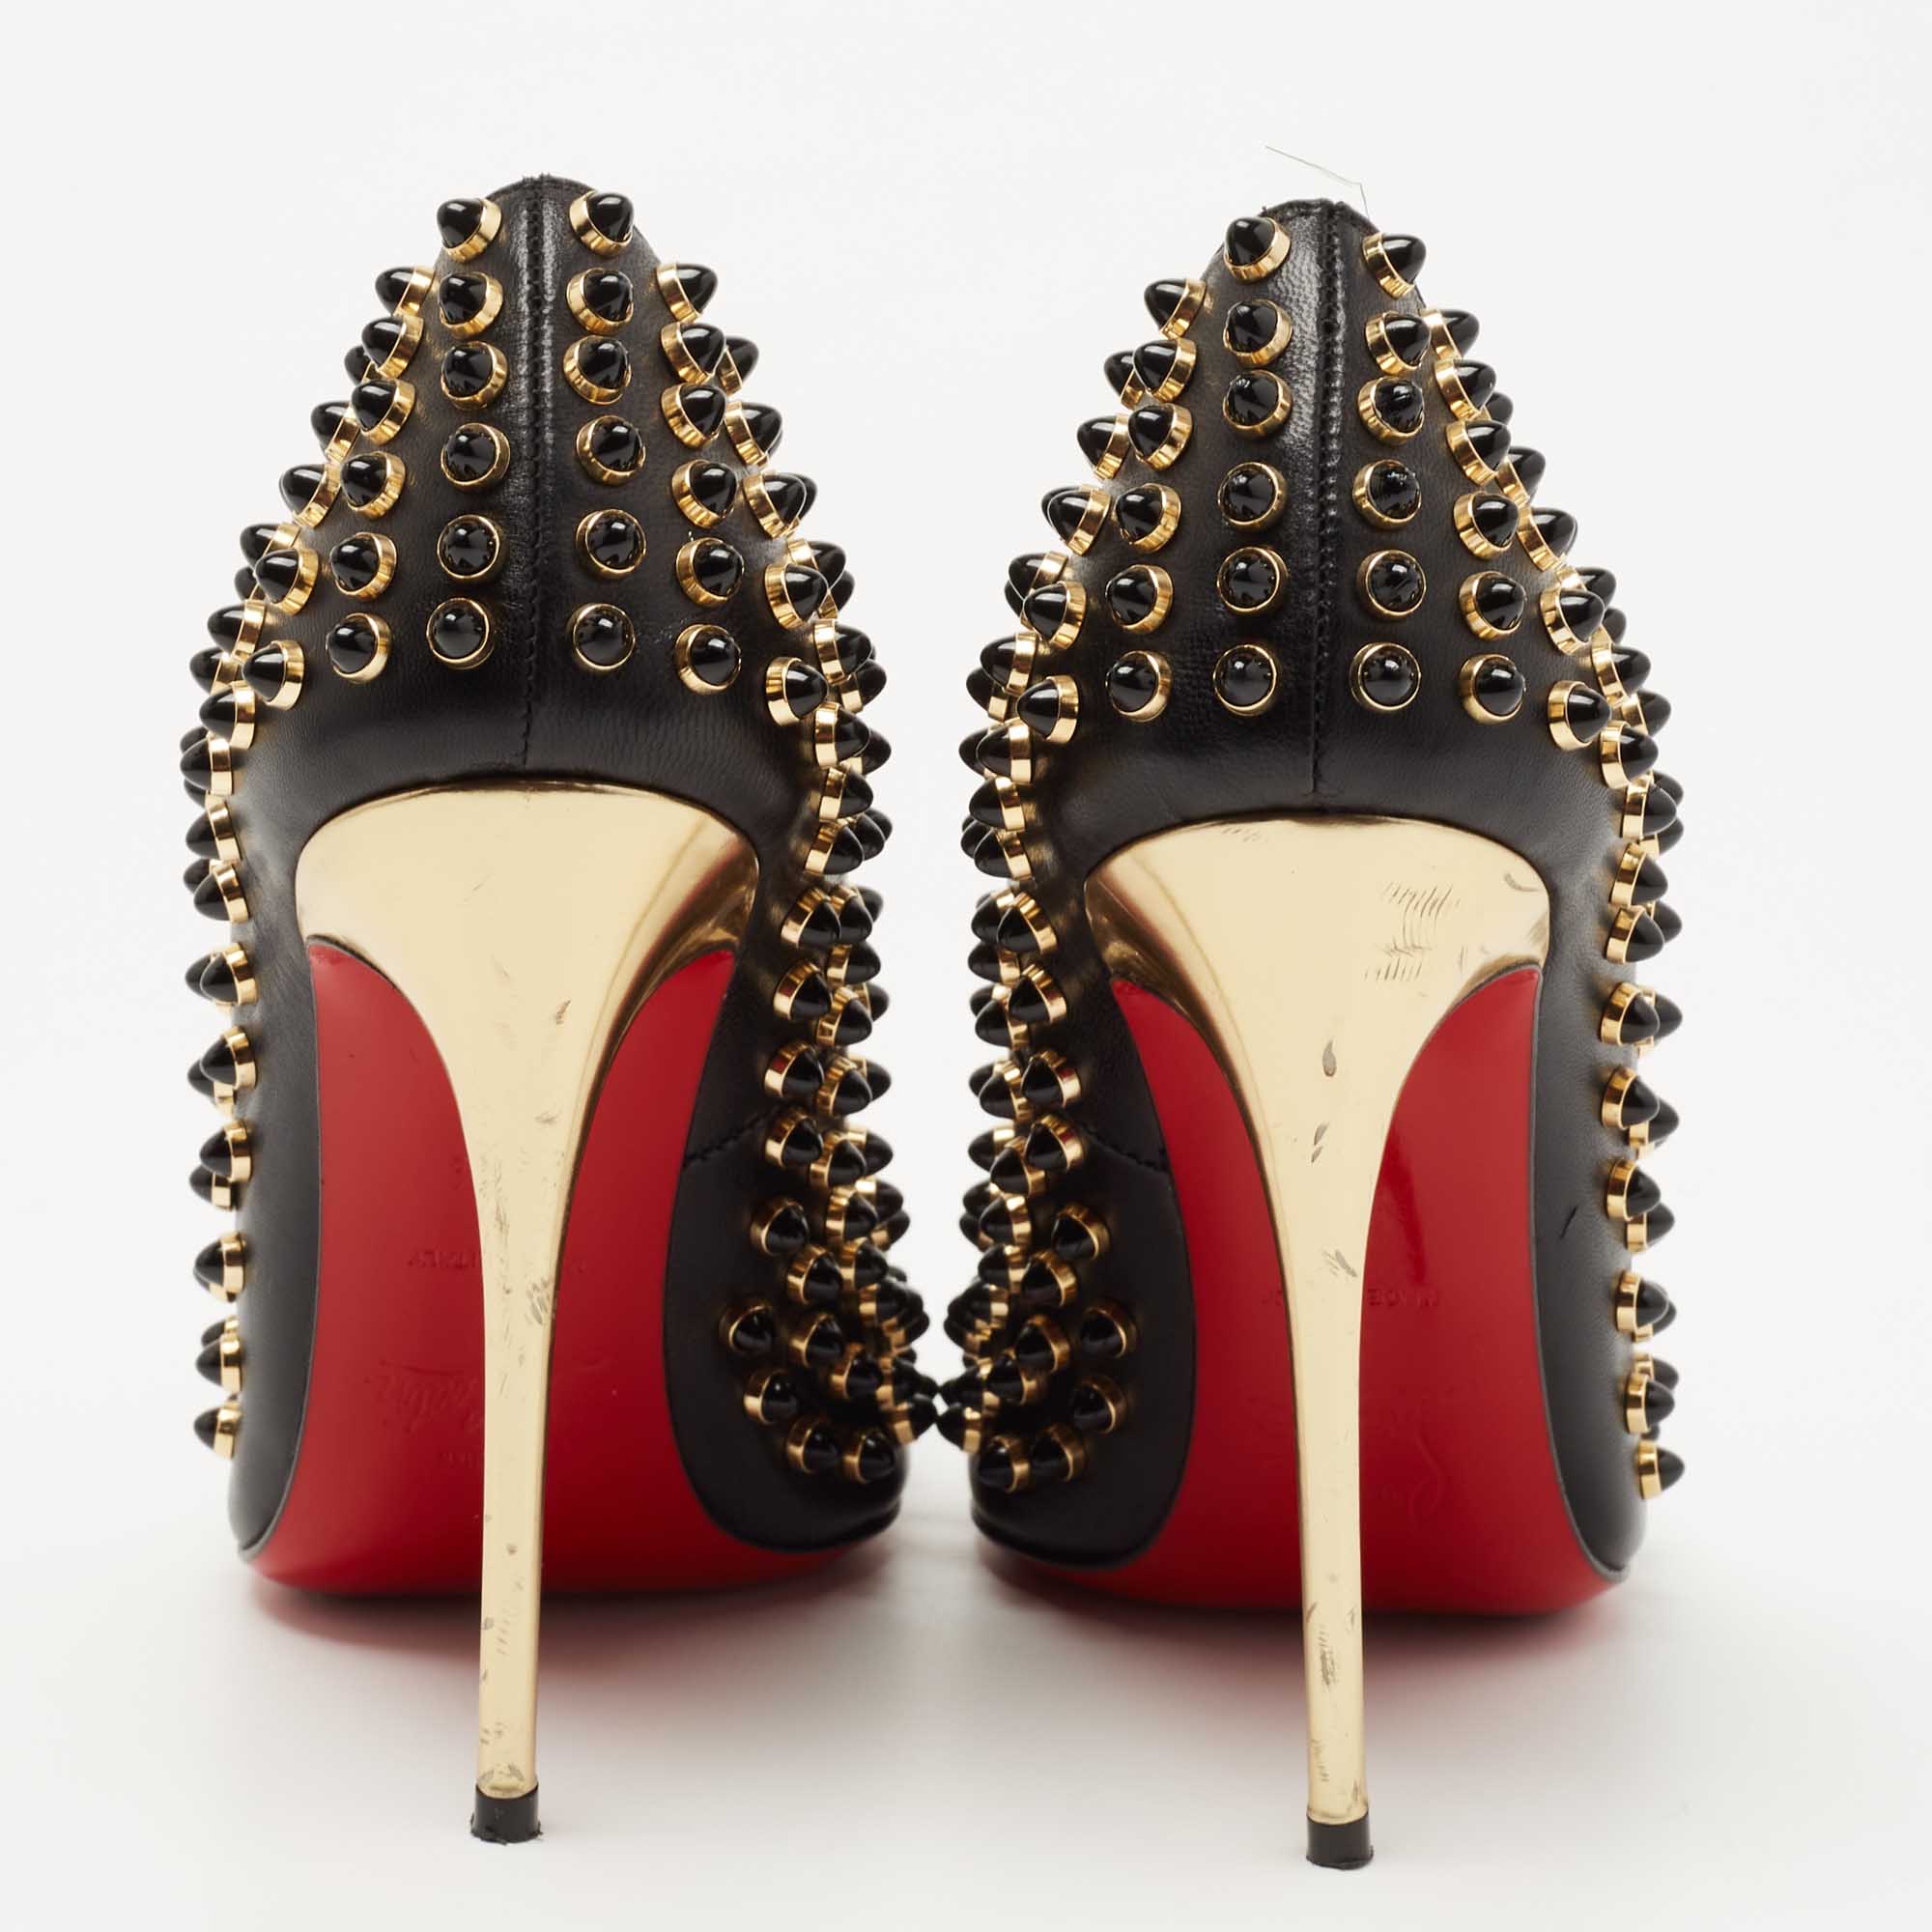 Christian Louboutin Black Leather Studded Follies Cabo Pumps Size 34.5